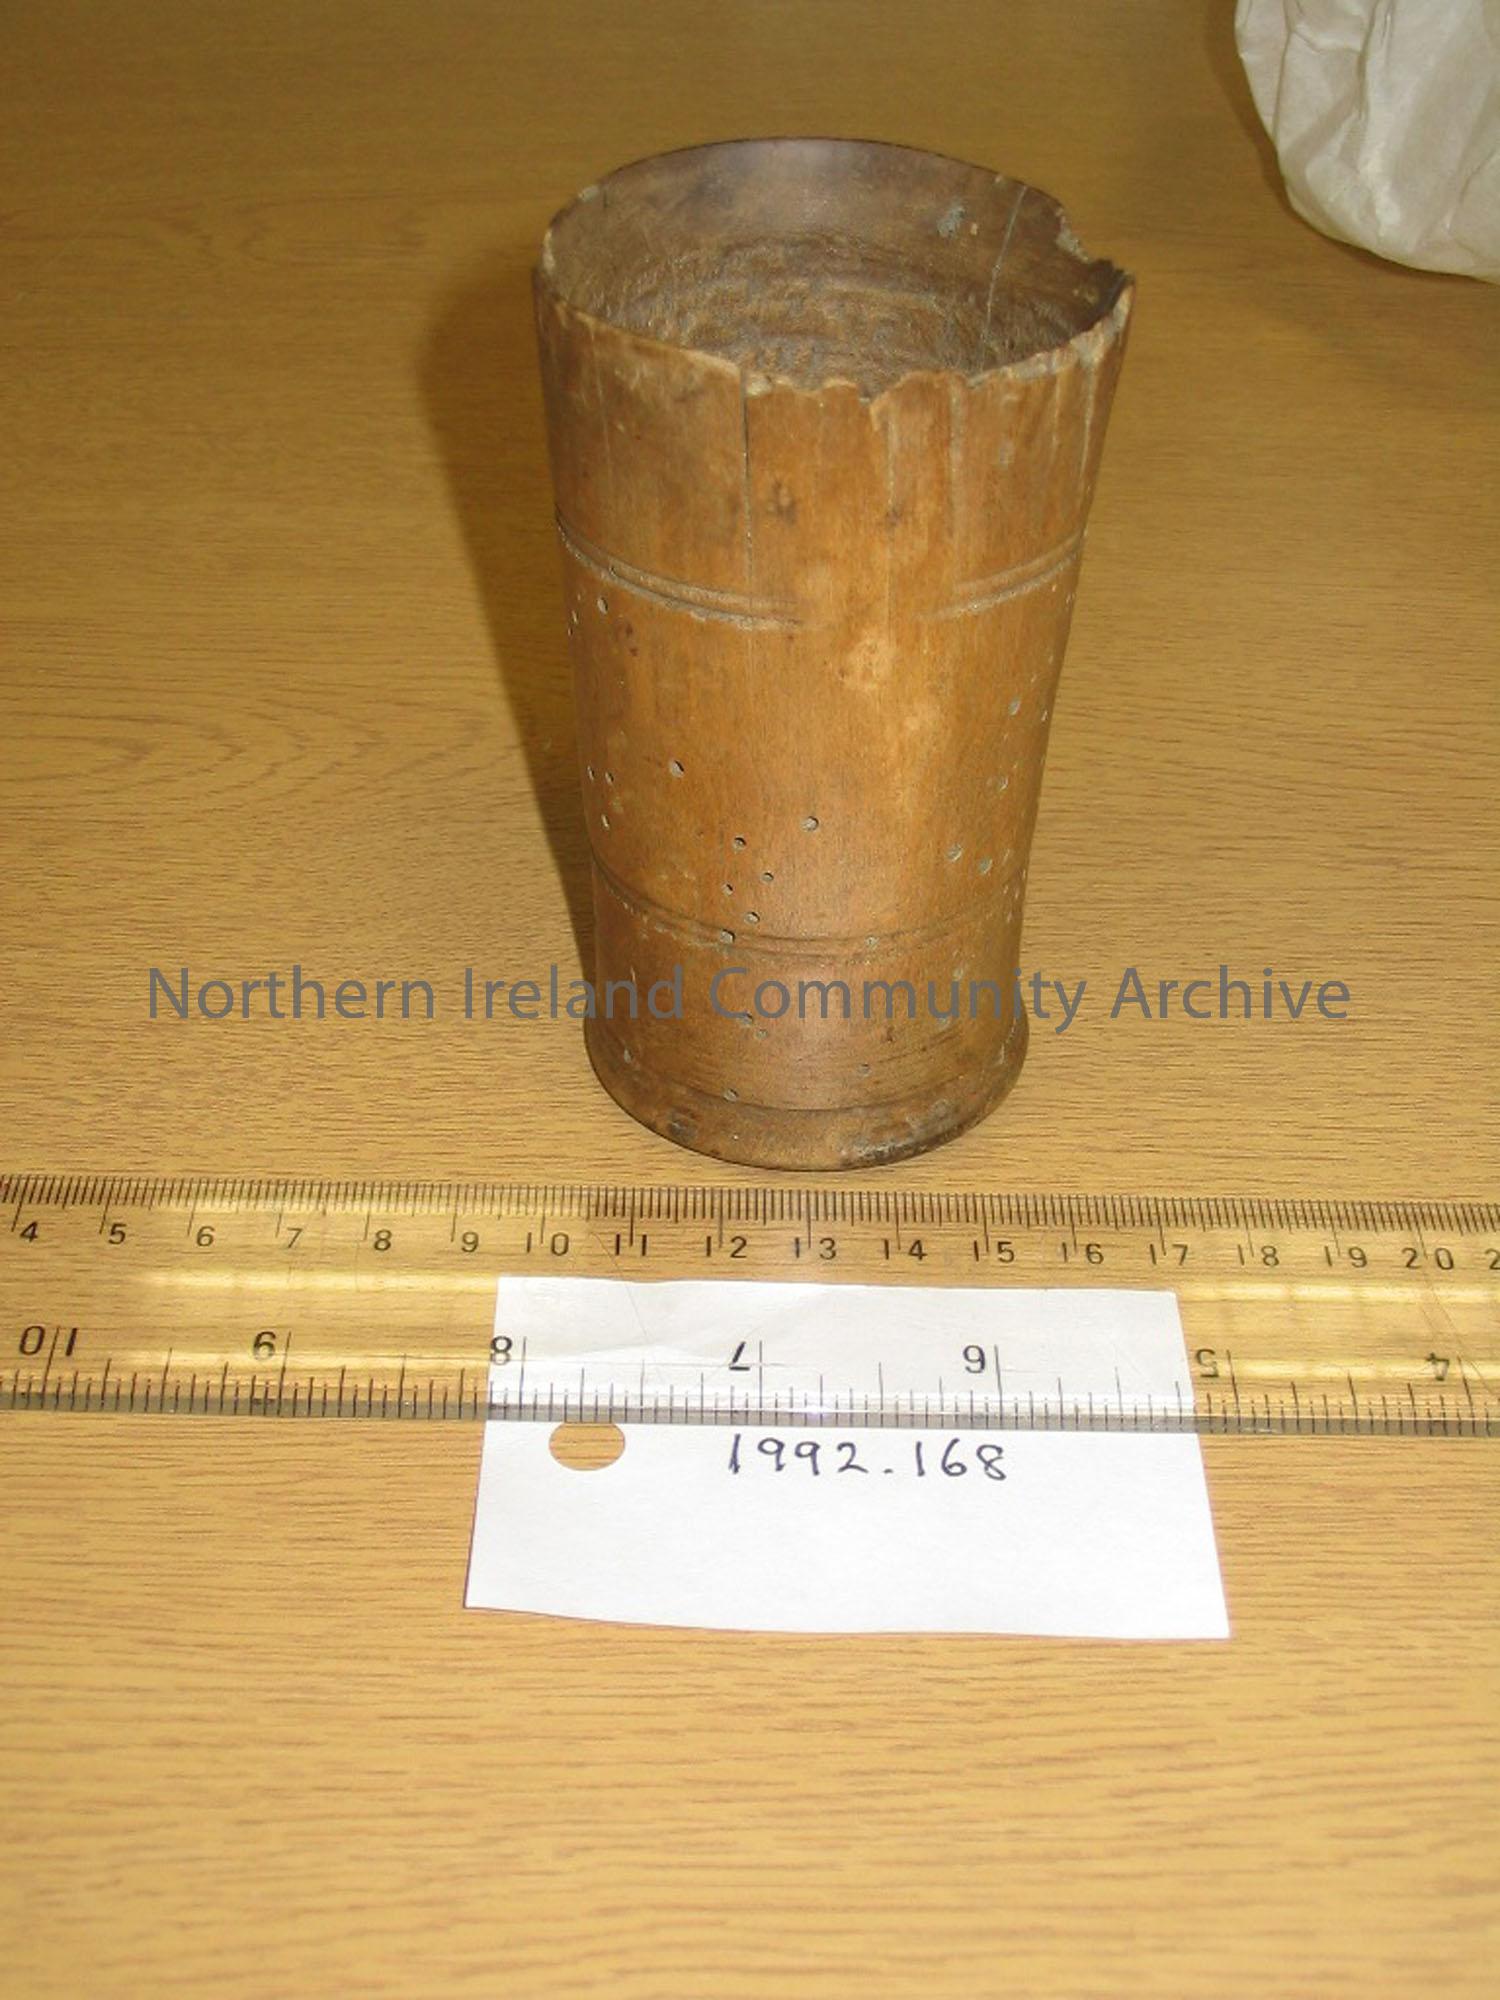 wooden goblet, lip of vessel chipped and evidence of wood worm.